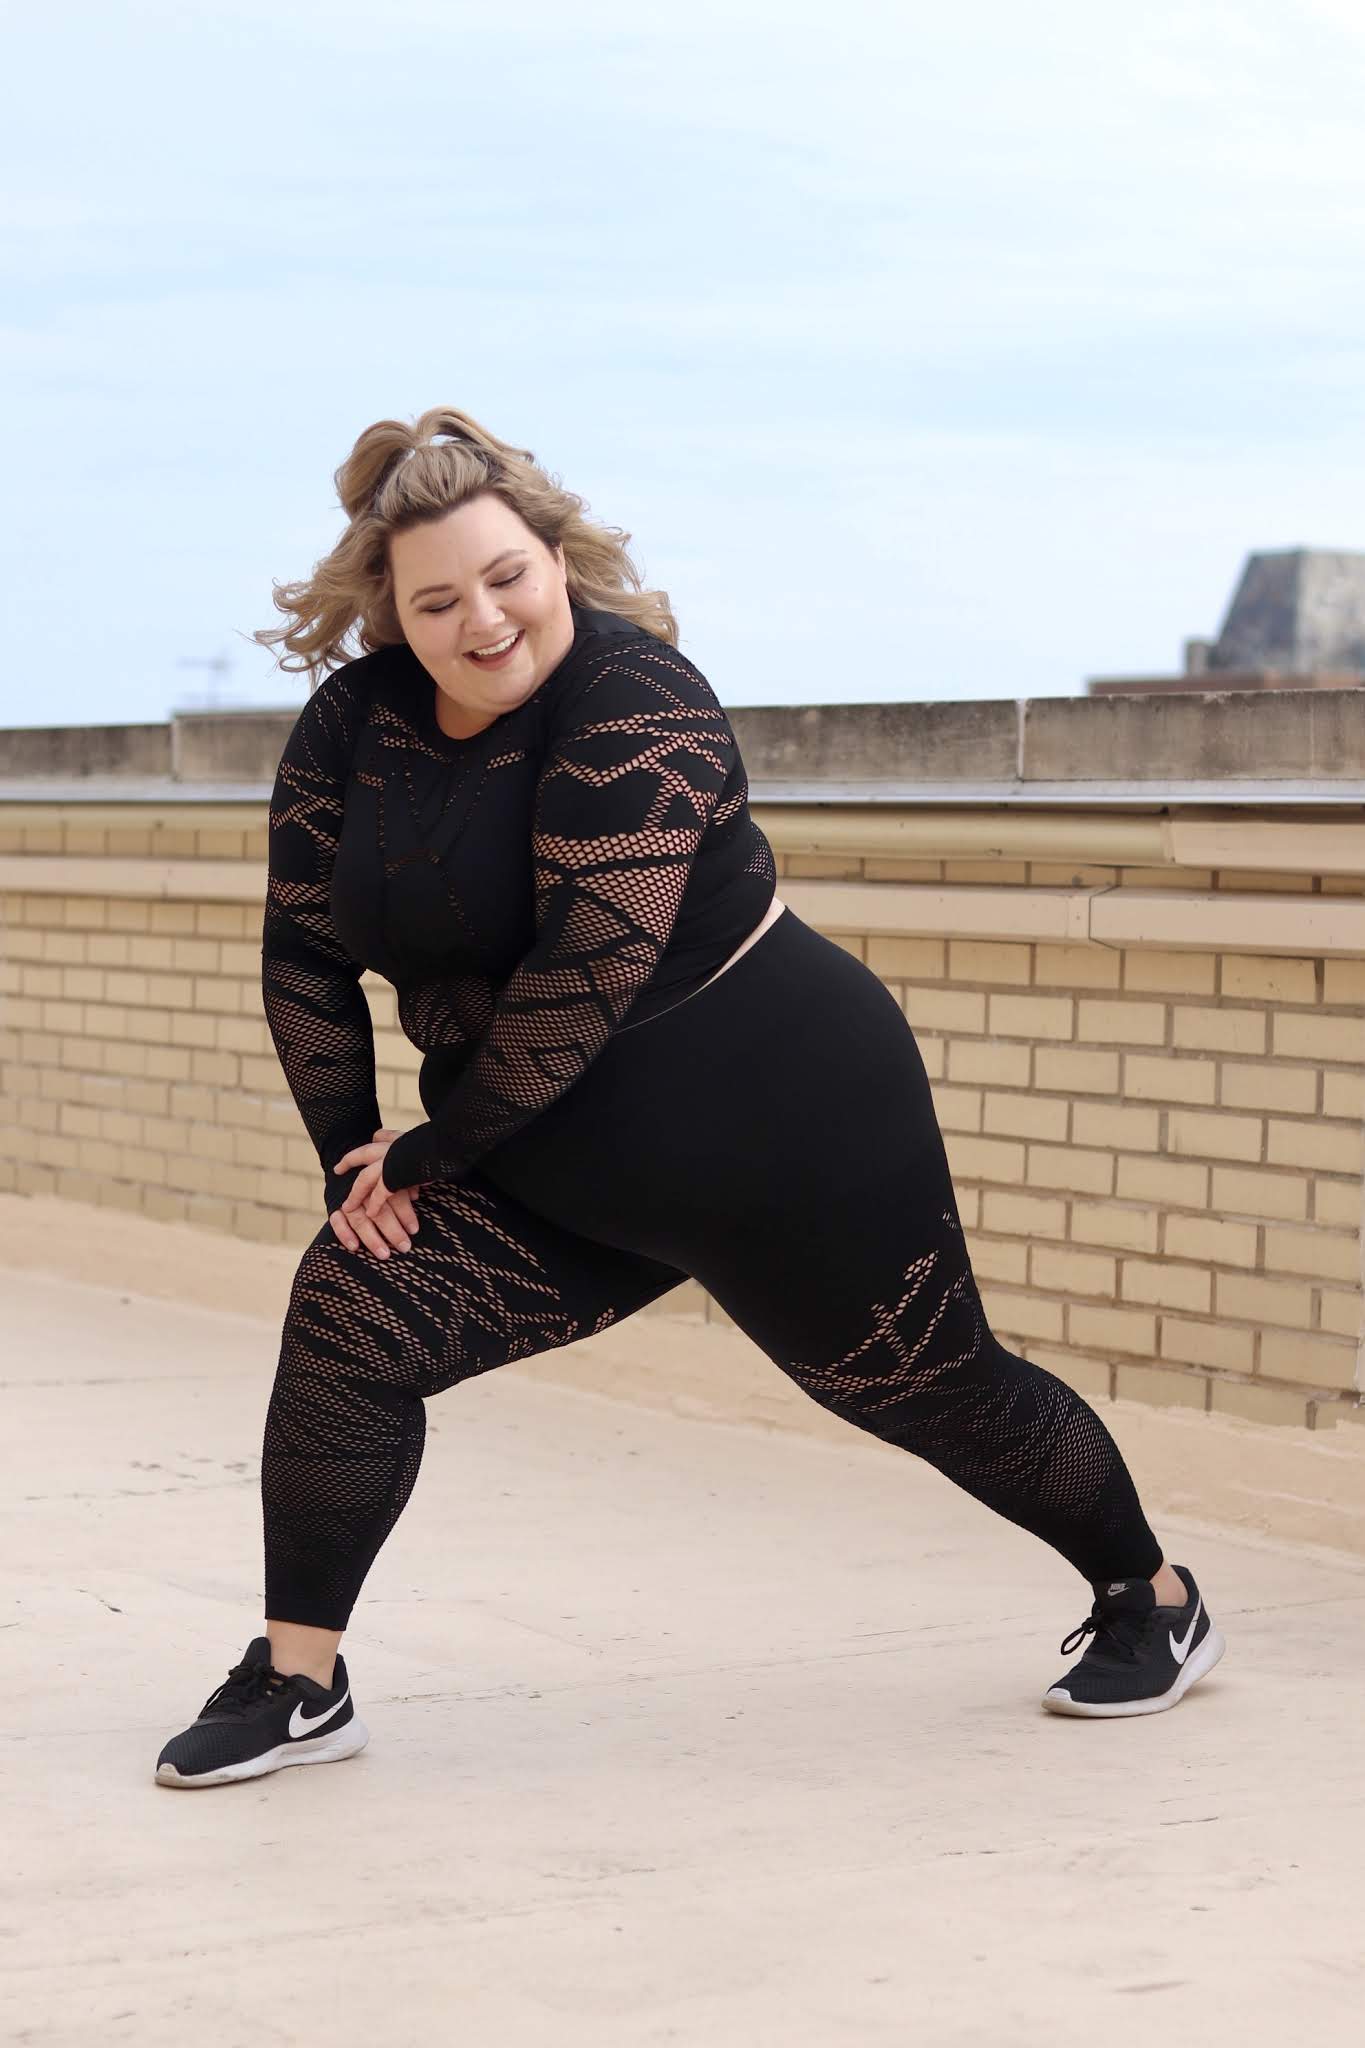 Chicago Plus Size Petite Fashion Blogger and model Natalie Craig Natalie in the City shares cute plus size workout sets Fabletics VIP